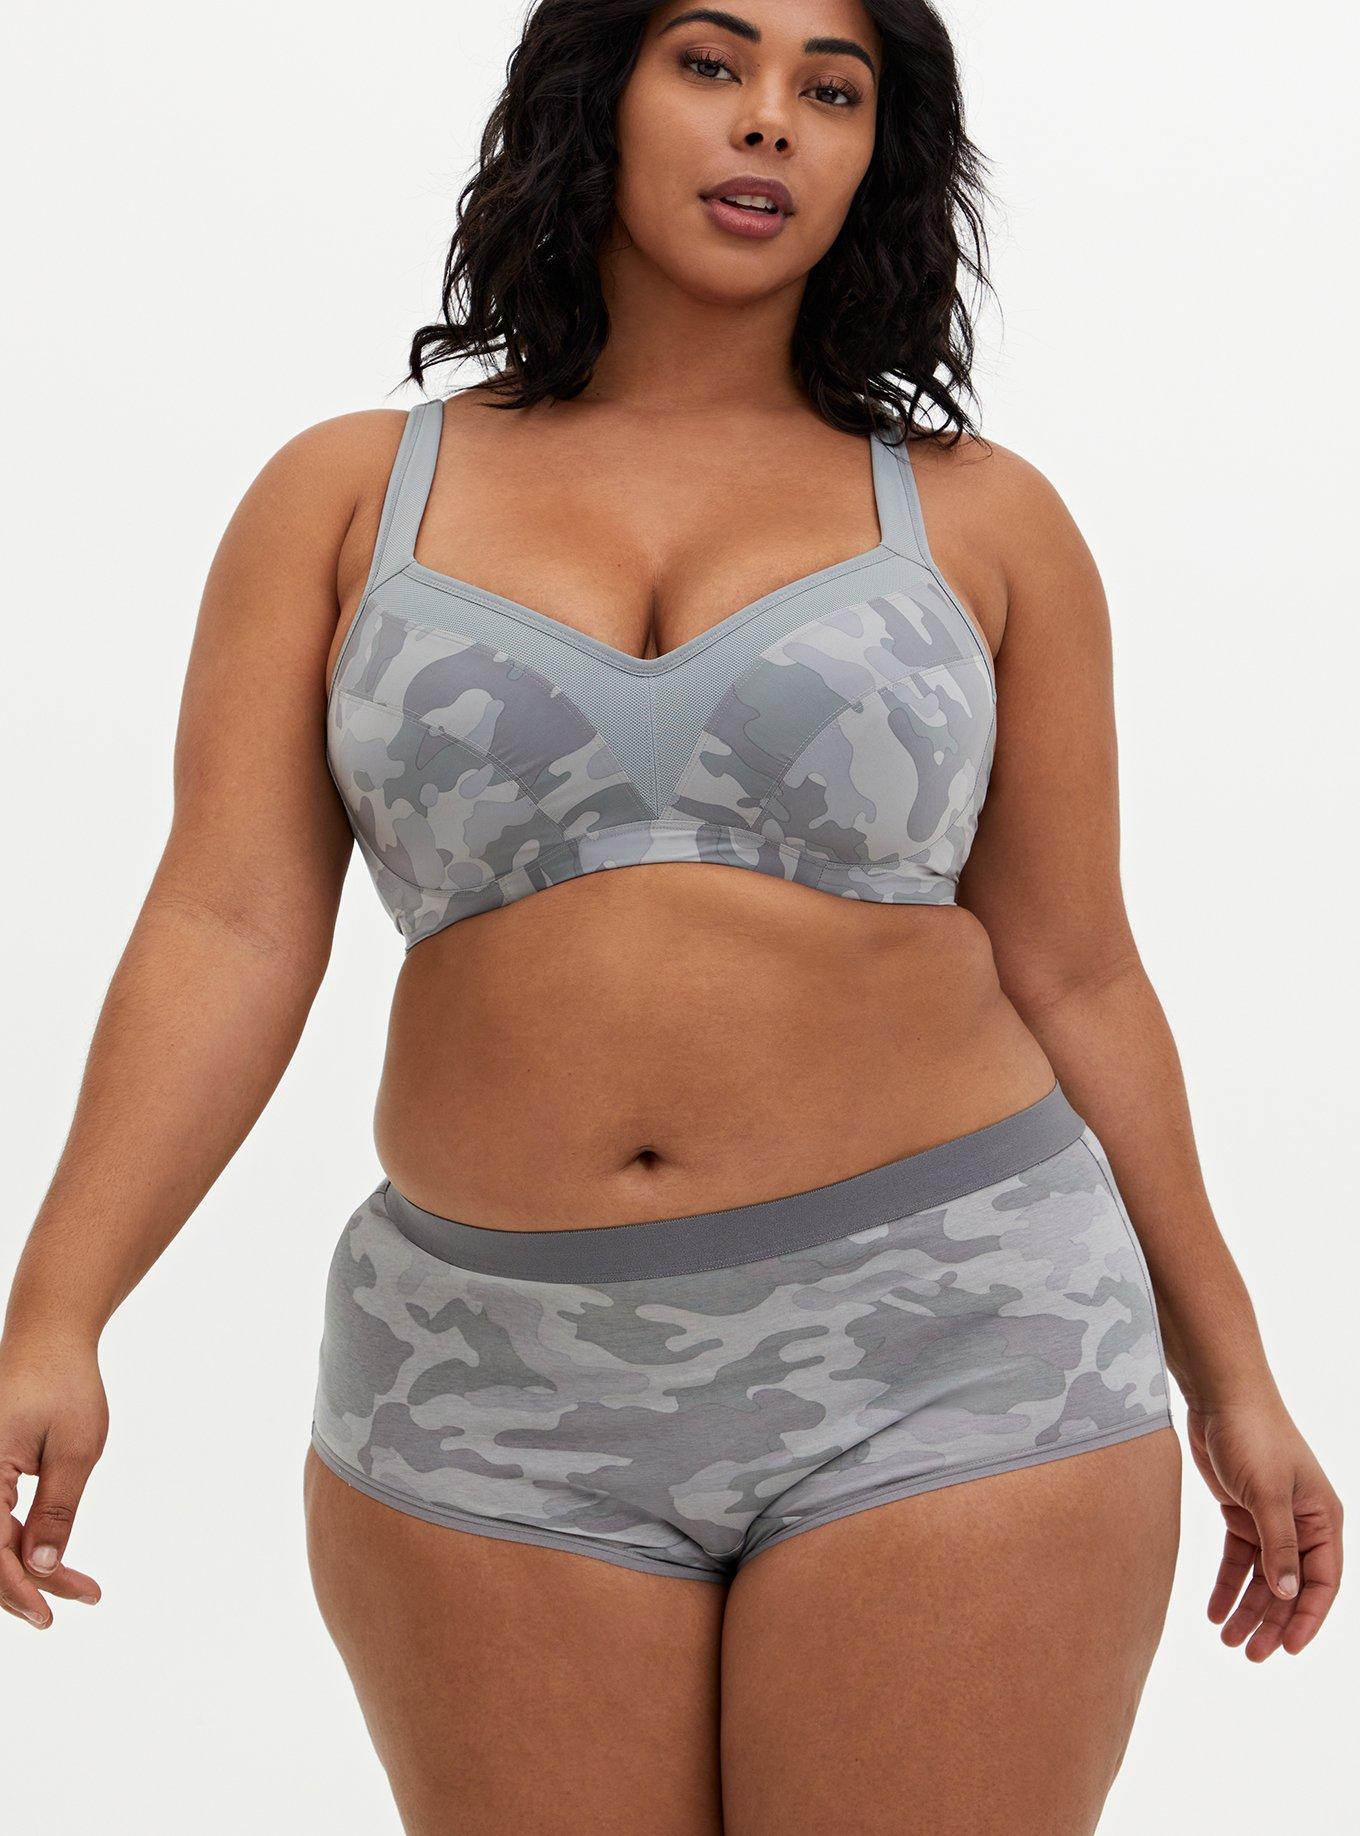 What makes an AWESOME Plus sized Sports Bra? – Le Buste Lingerie